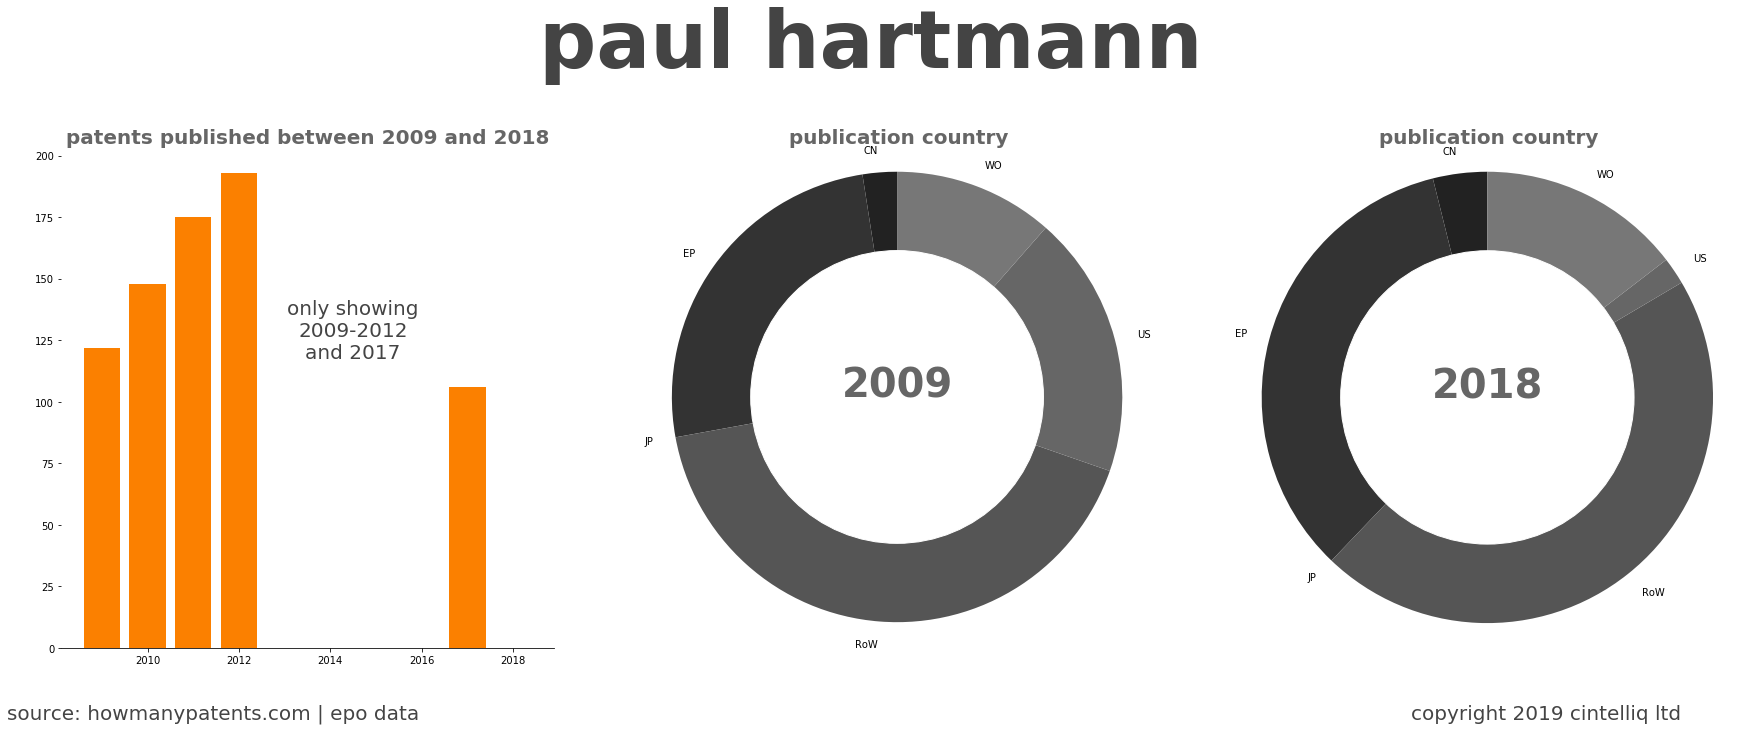 summary of patents for Paul Hartmann